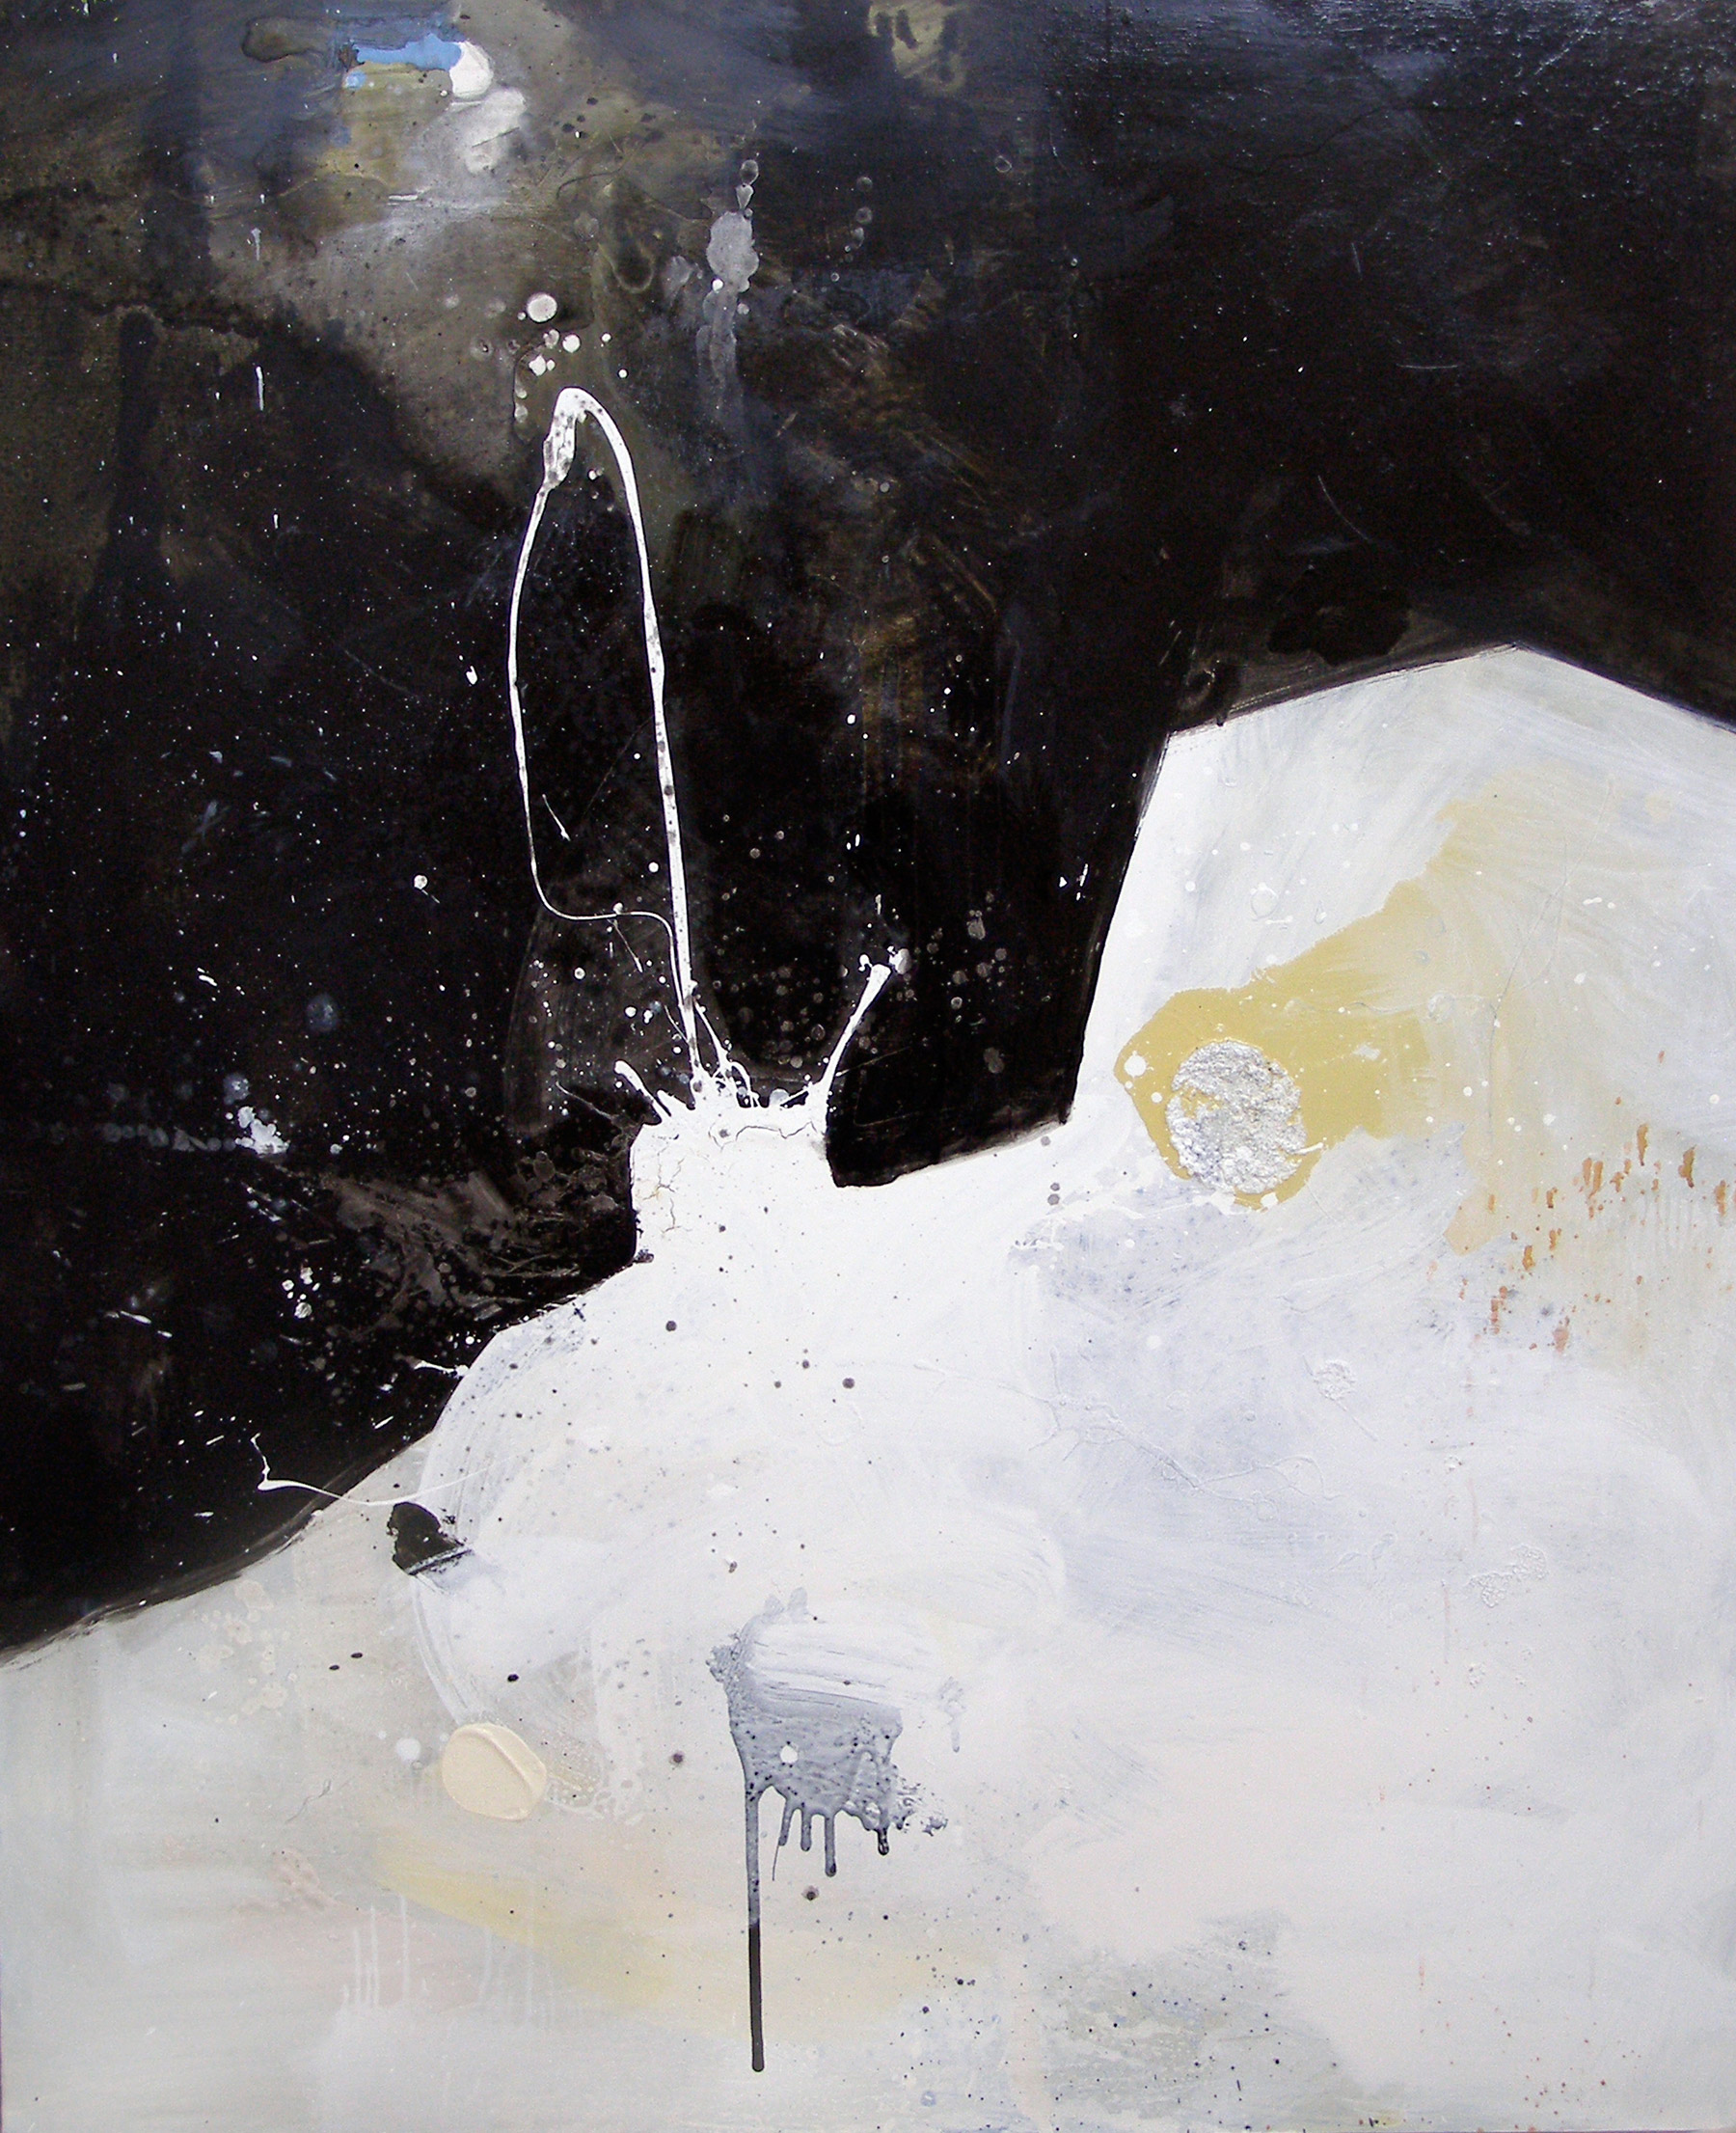 Black and white volcano, 120x100cm, Mixed technique on canvas, 2010